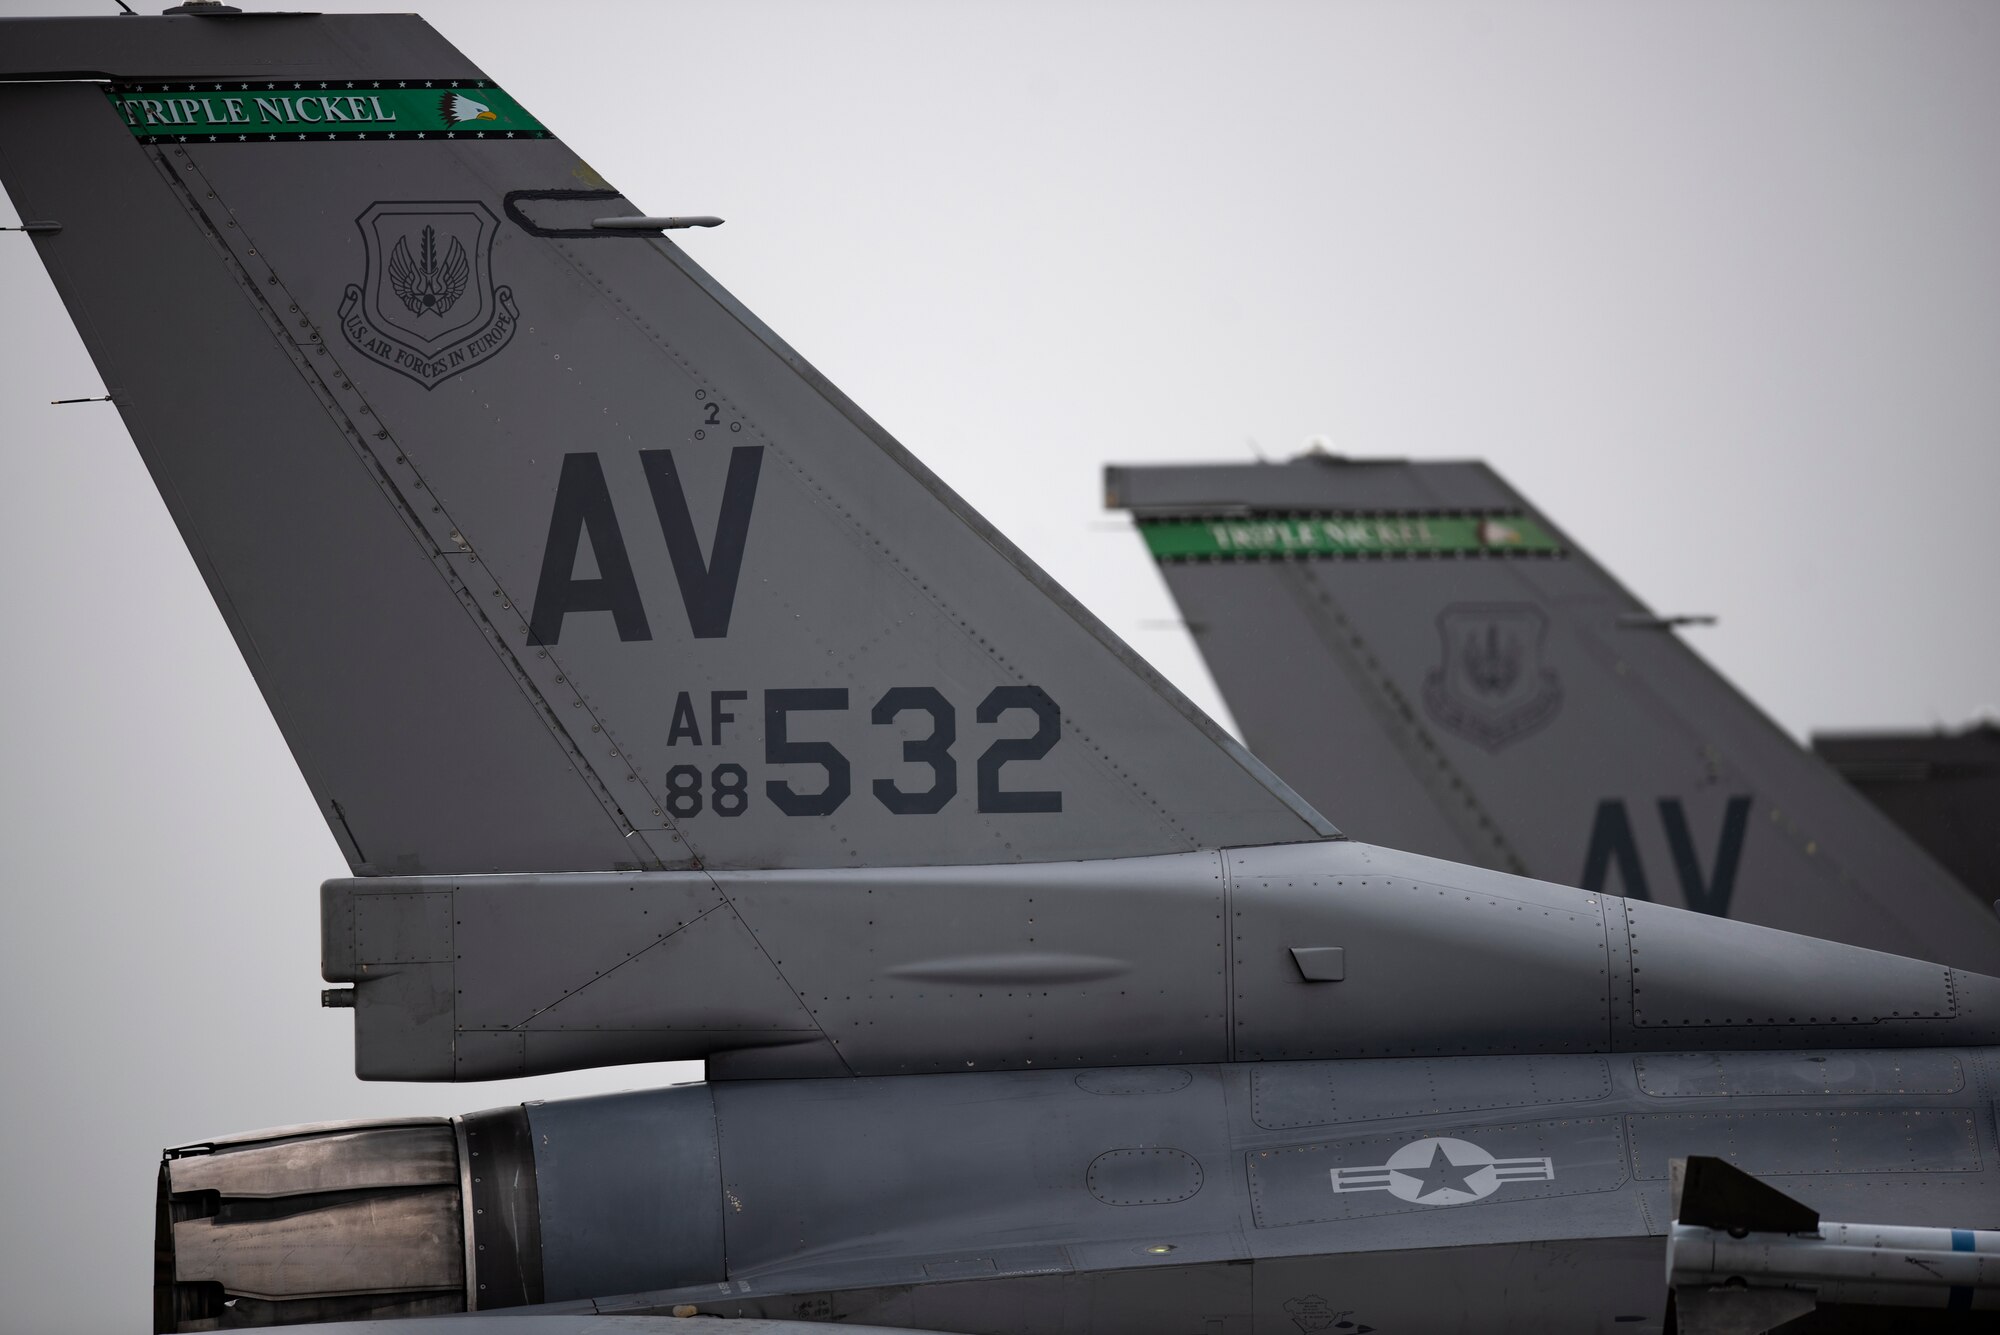 U.S. Air Force F-16 Fighting Falcons assigned to the 510th Fighter Squadron, Aviano Air Base, Italy, arrive at Royal Air Force Lakenheath, England, Aug. 28, 2020. Aircraft and Airmen from the 510th FS are participating in a flying training deployment event to enhance interoperability, maintain joint readiness and strengthen relationships with regional allies and partners. (U.S. Air Force photo by Airman 1st Class Jessi Monte)